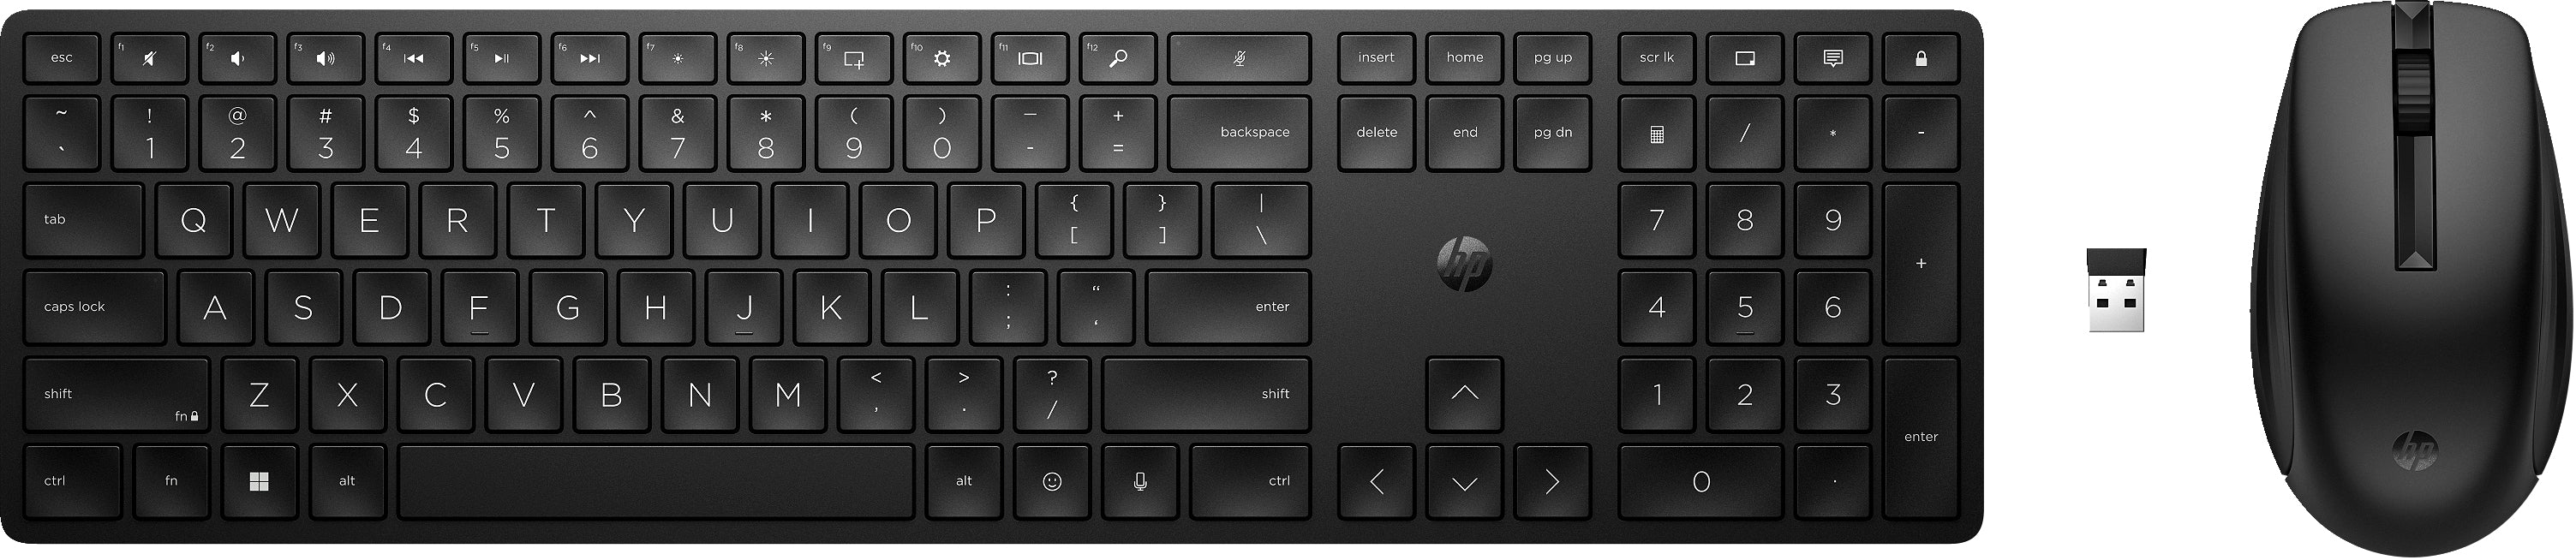 HP 655 Wireless Keyboard and Mouse Combo, Full-size (100%), RF Wireless, Membrane, Black, Mouse included